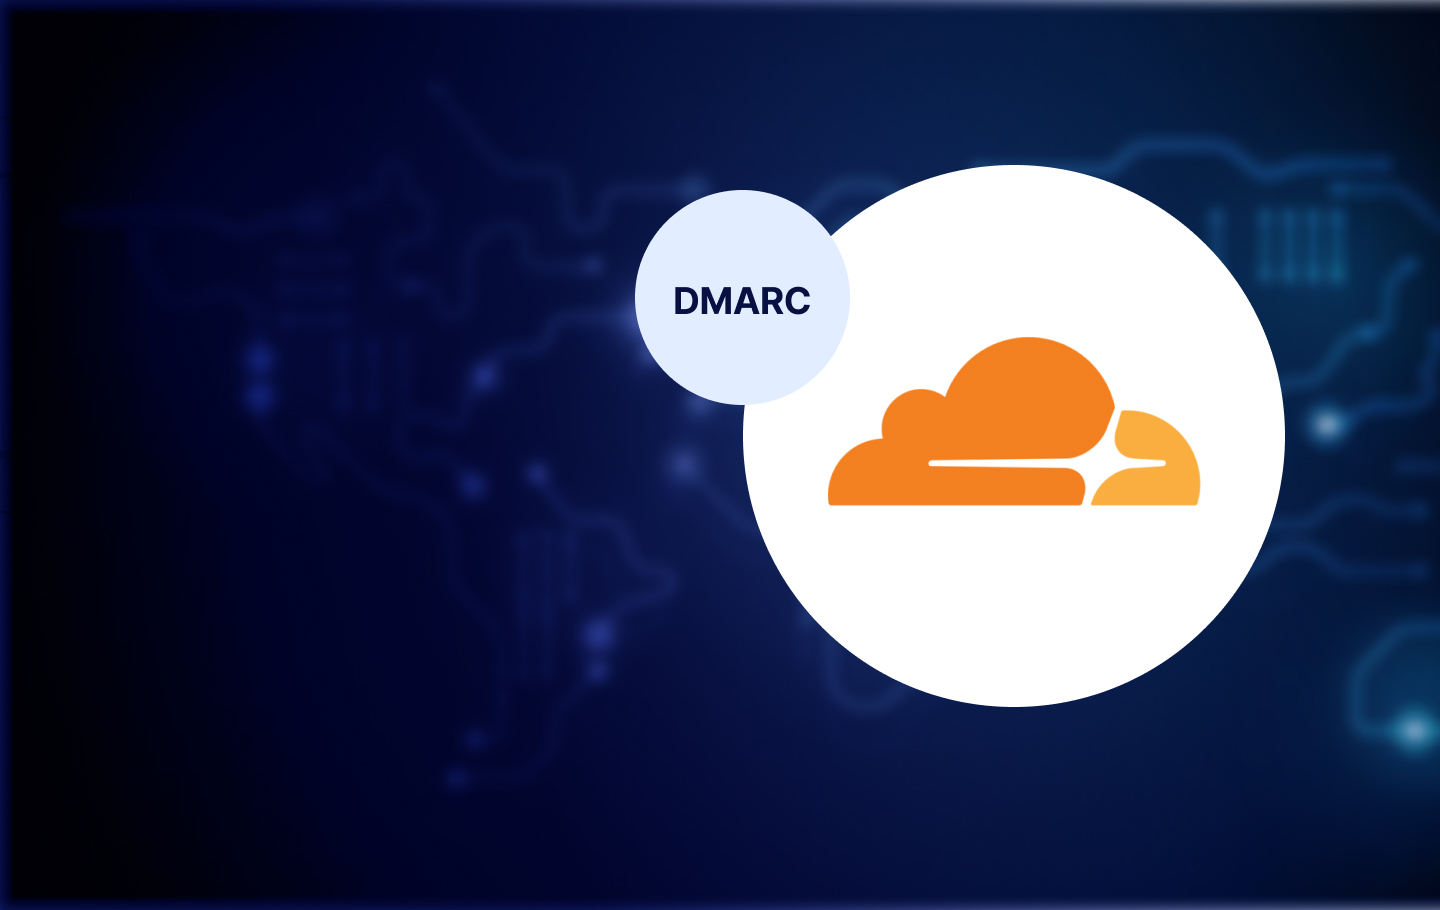 Cloudflare logo and DMARC written on it on a blue background